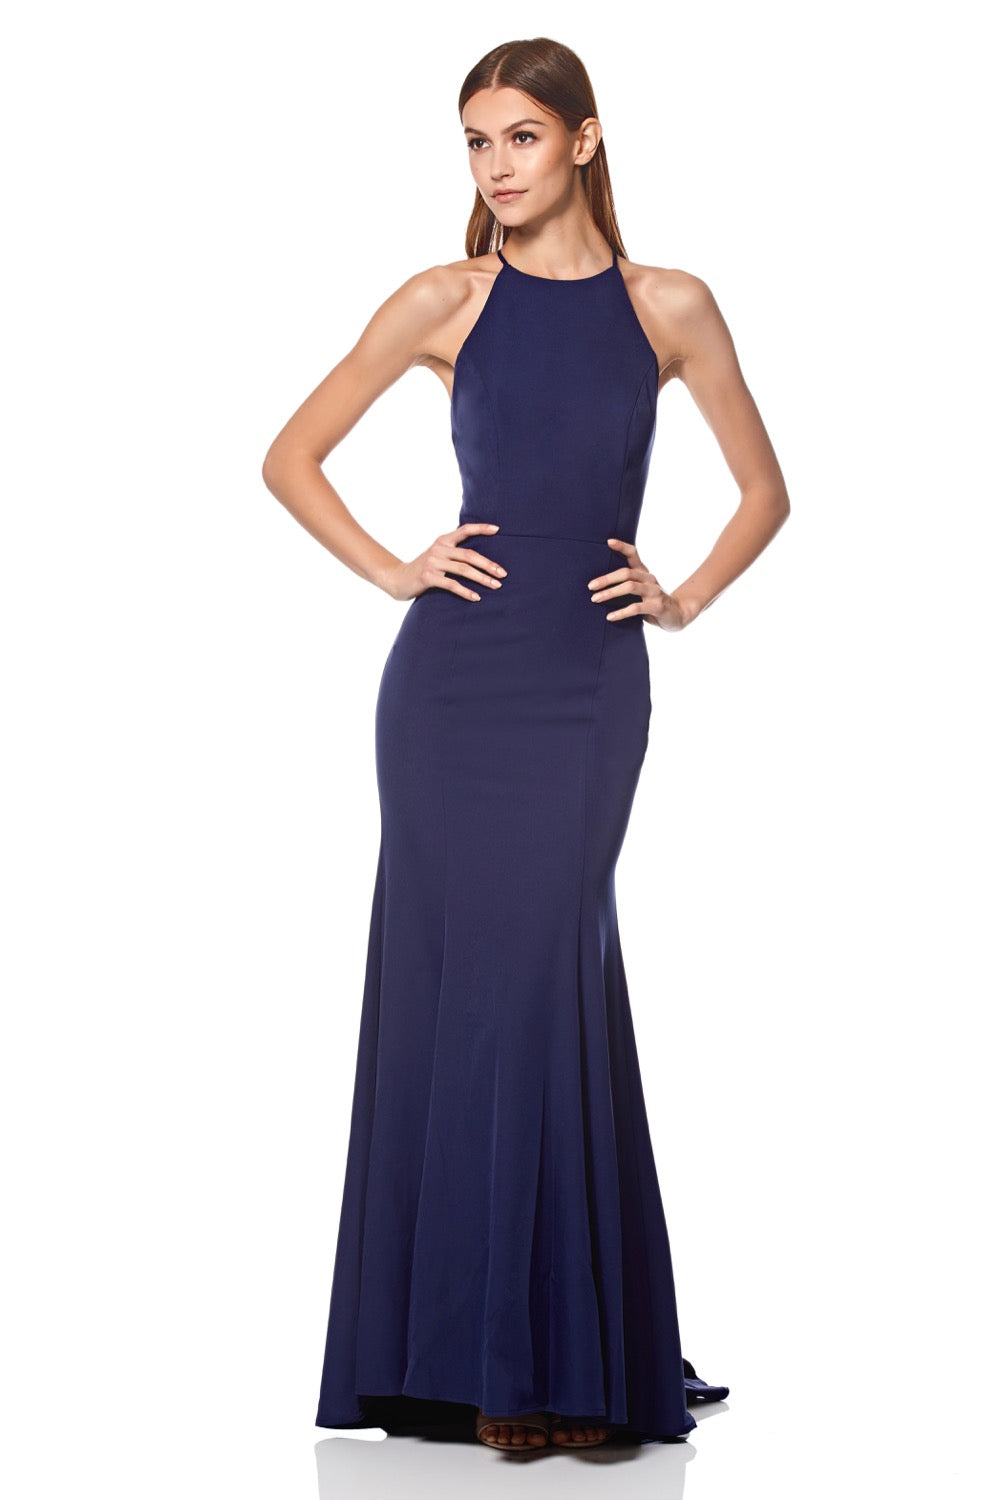 Carlin High Neck Fishtail Dress with Open Back Detail